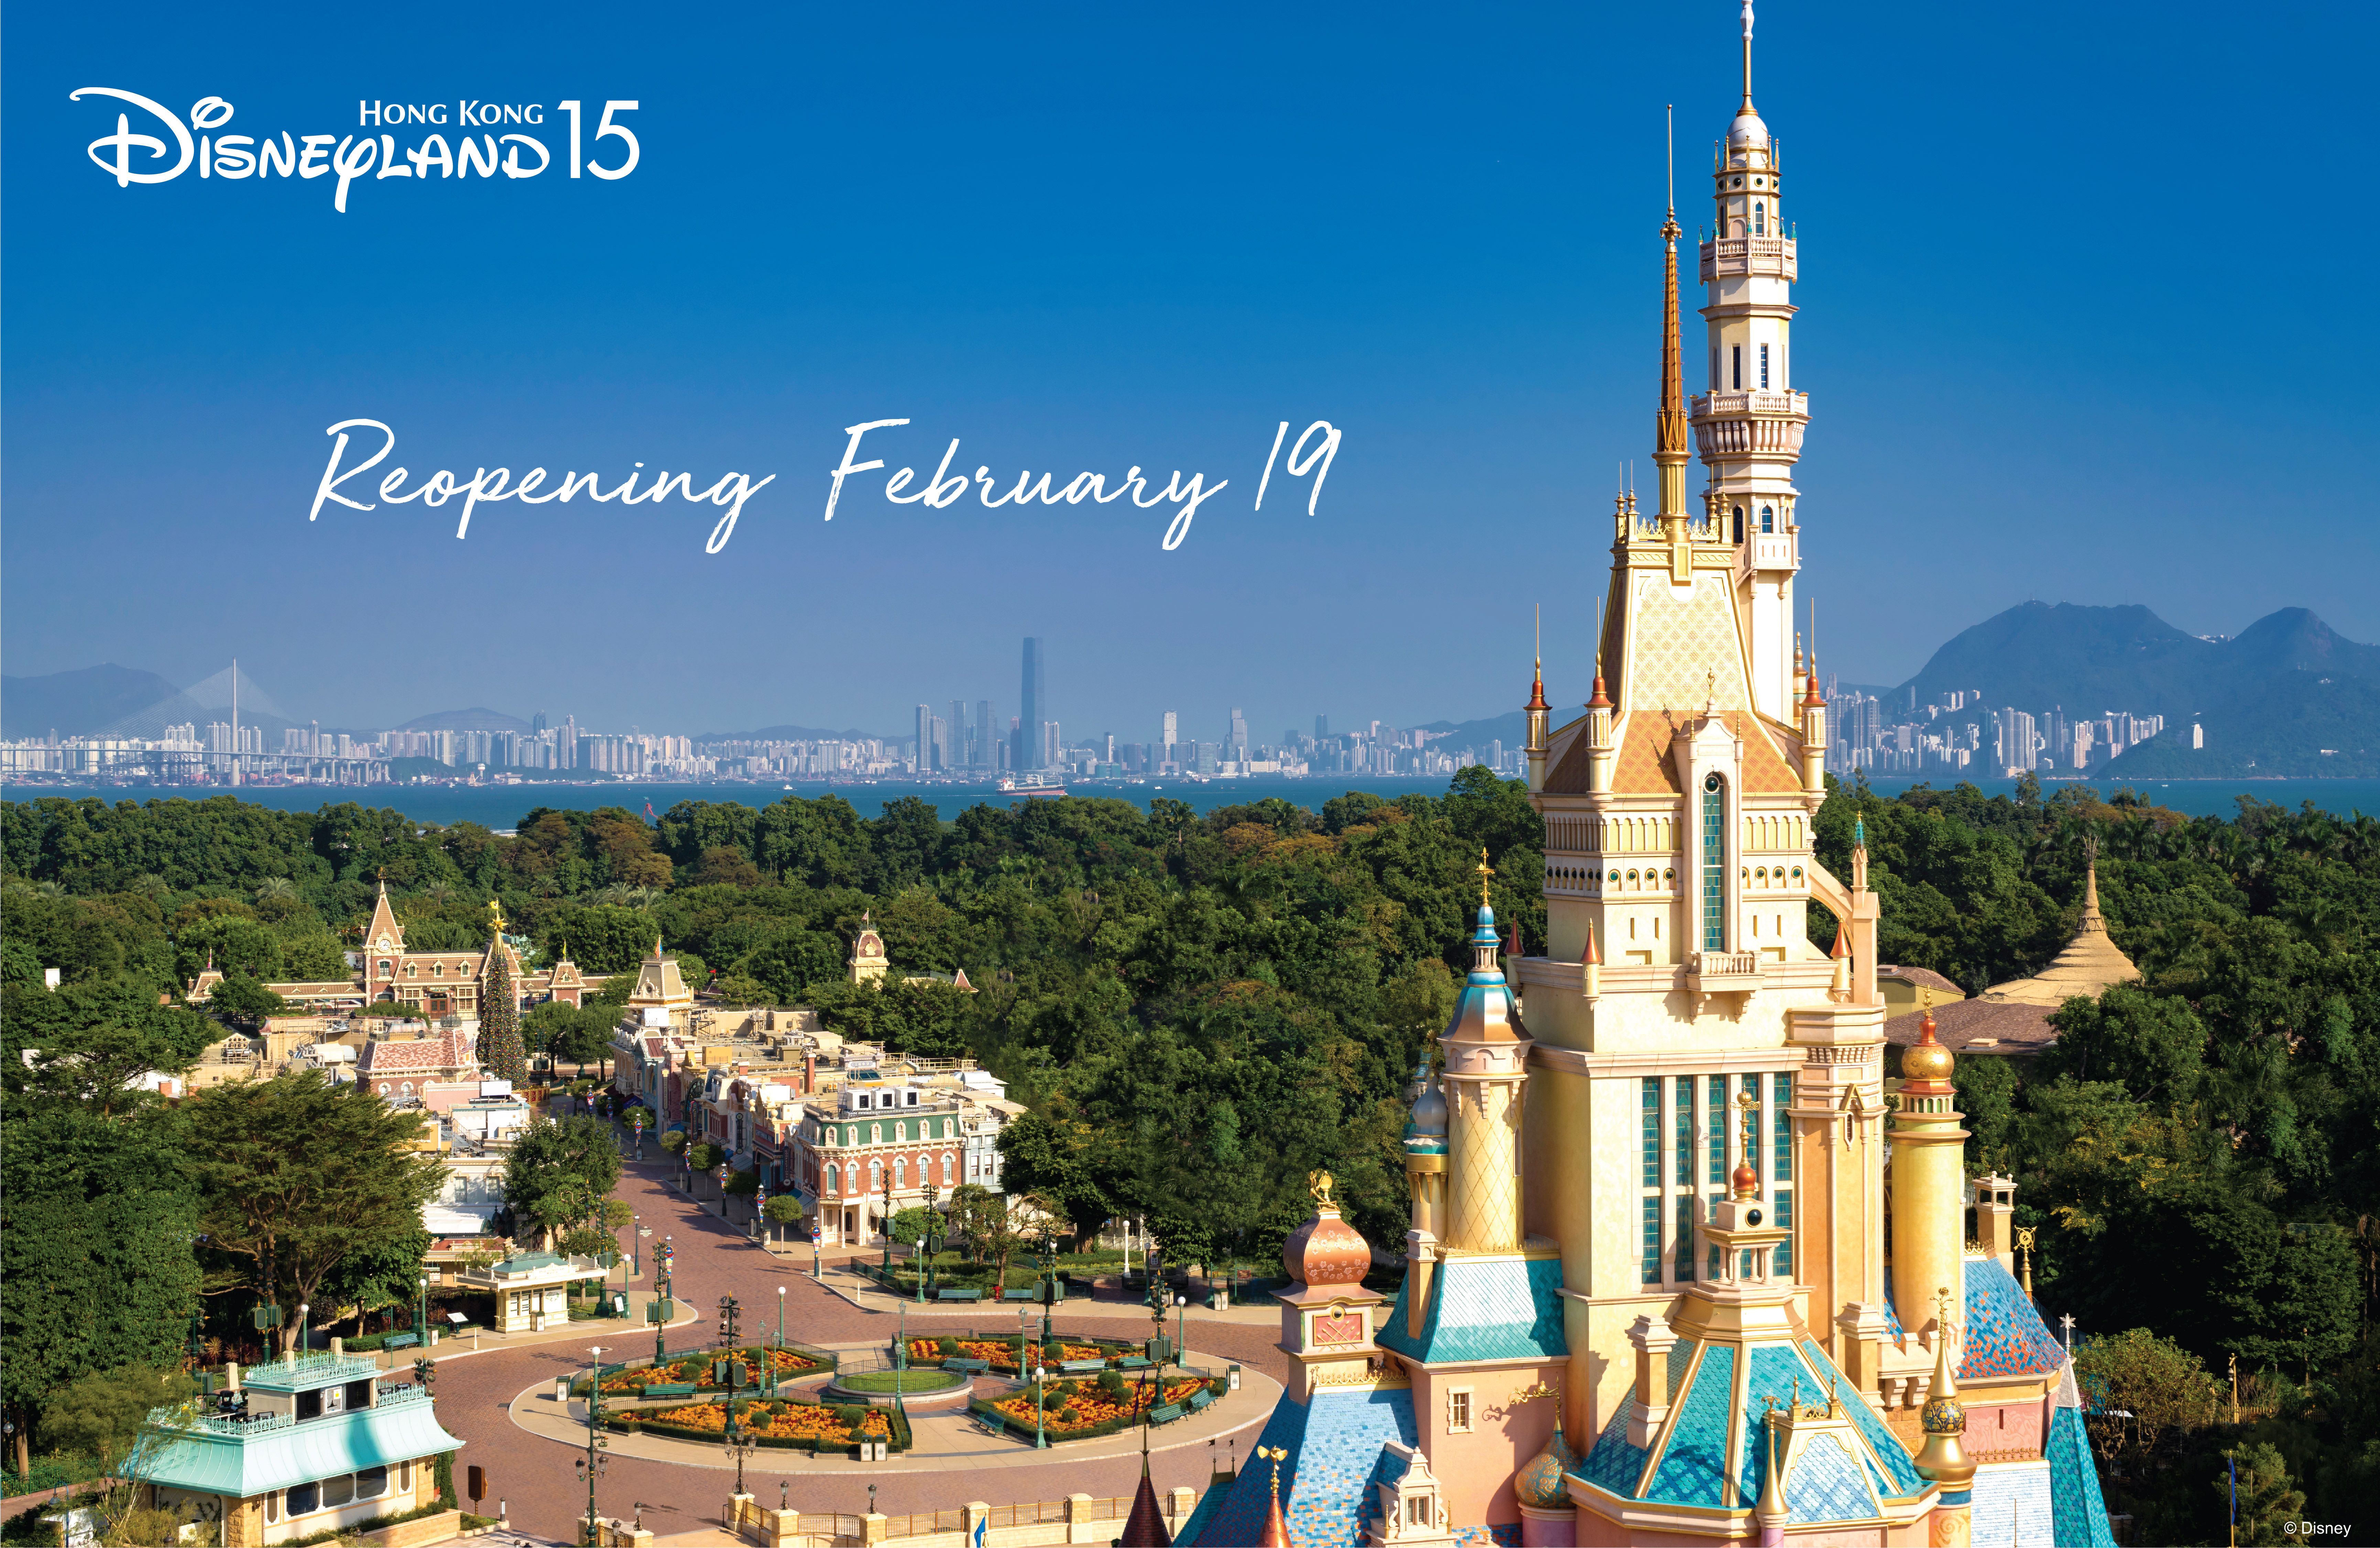 Hong Kong Disneyland will reopen to guests on Friday, 19 February, with reservations commencing the day before. Click to enlarge.